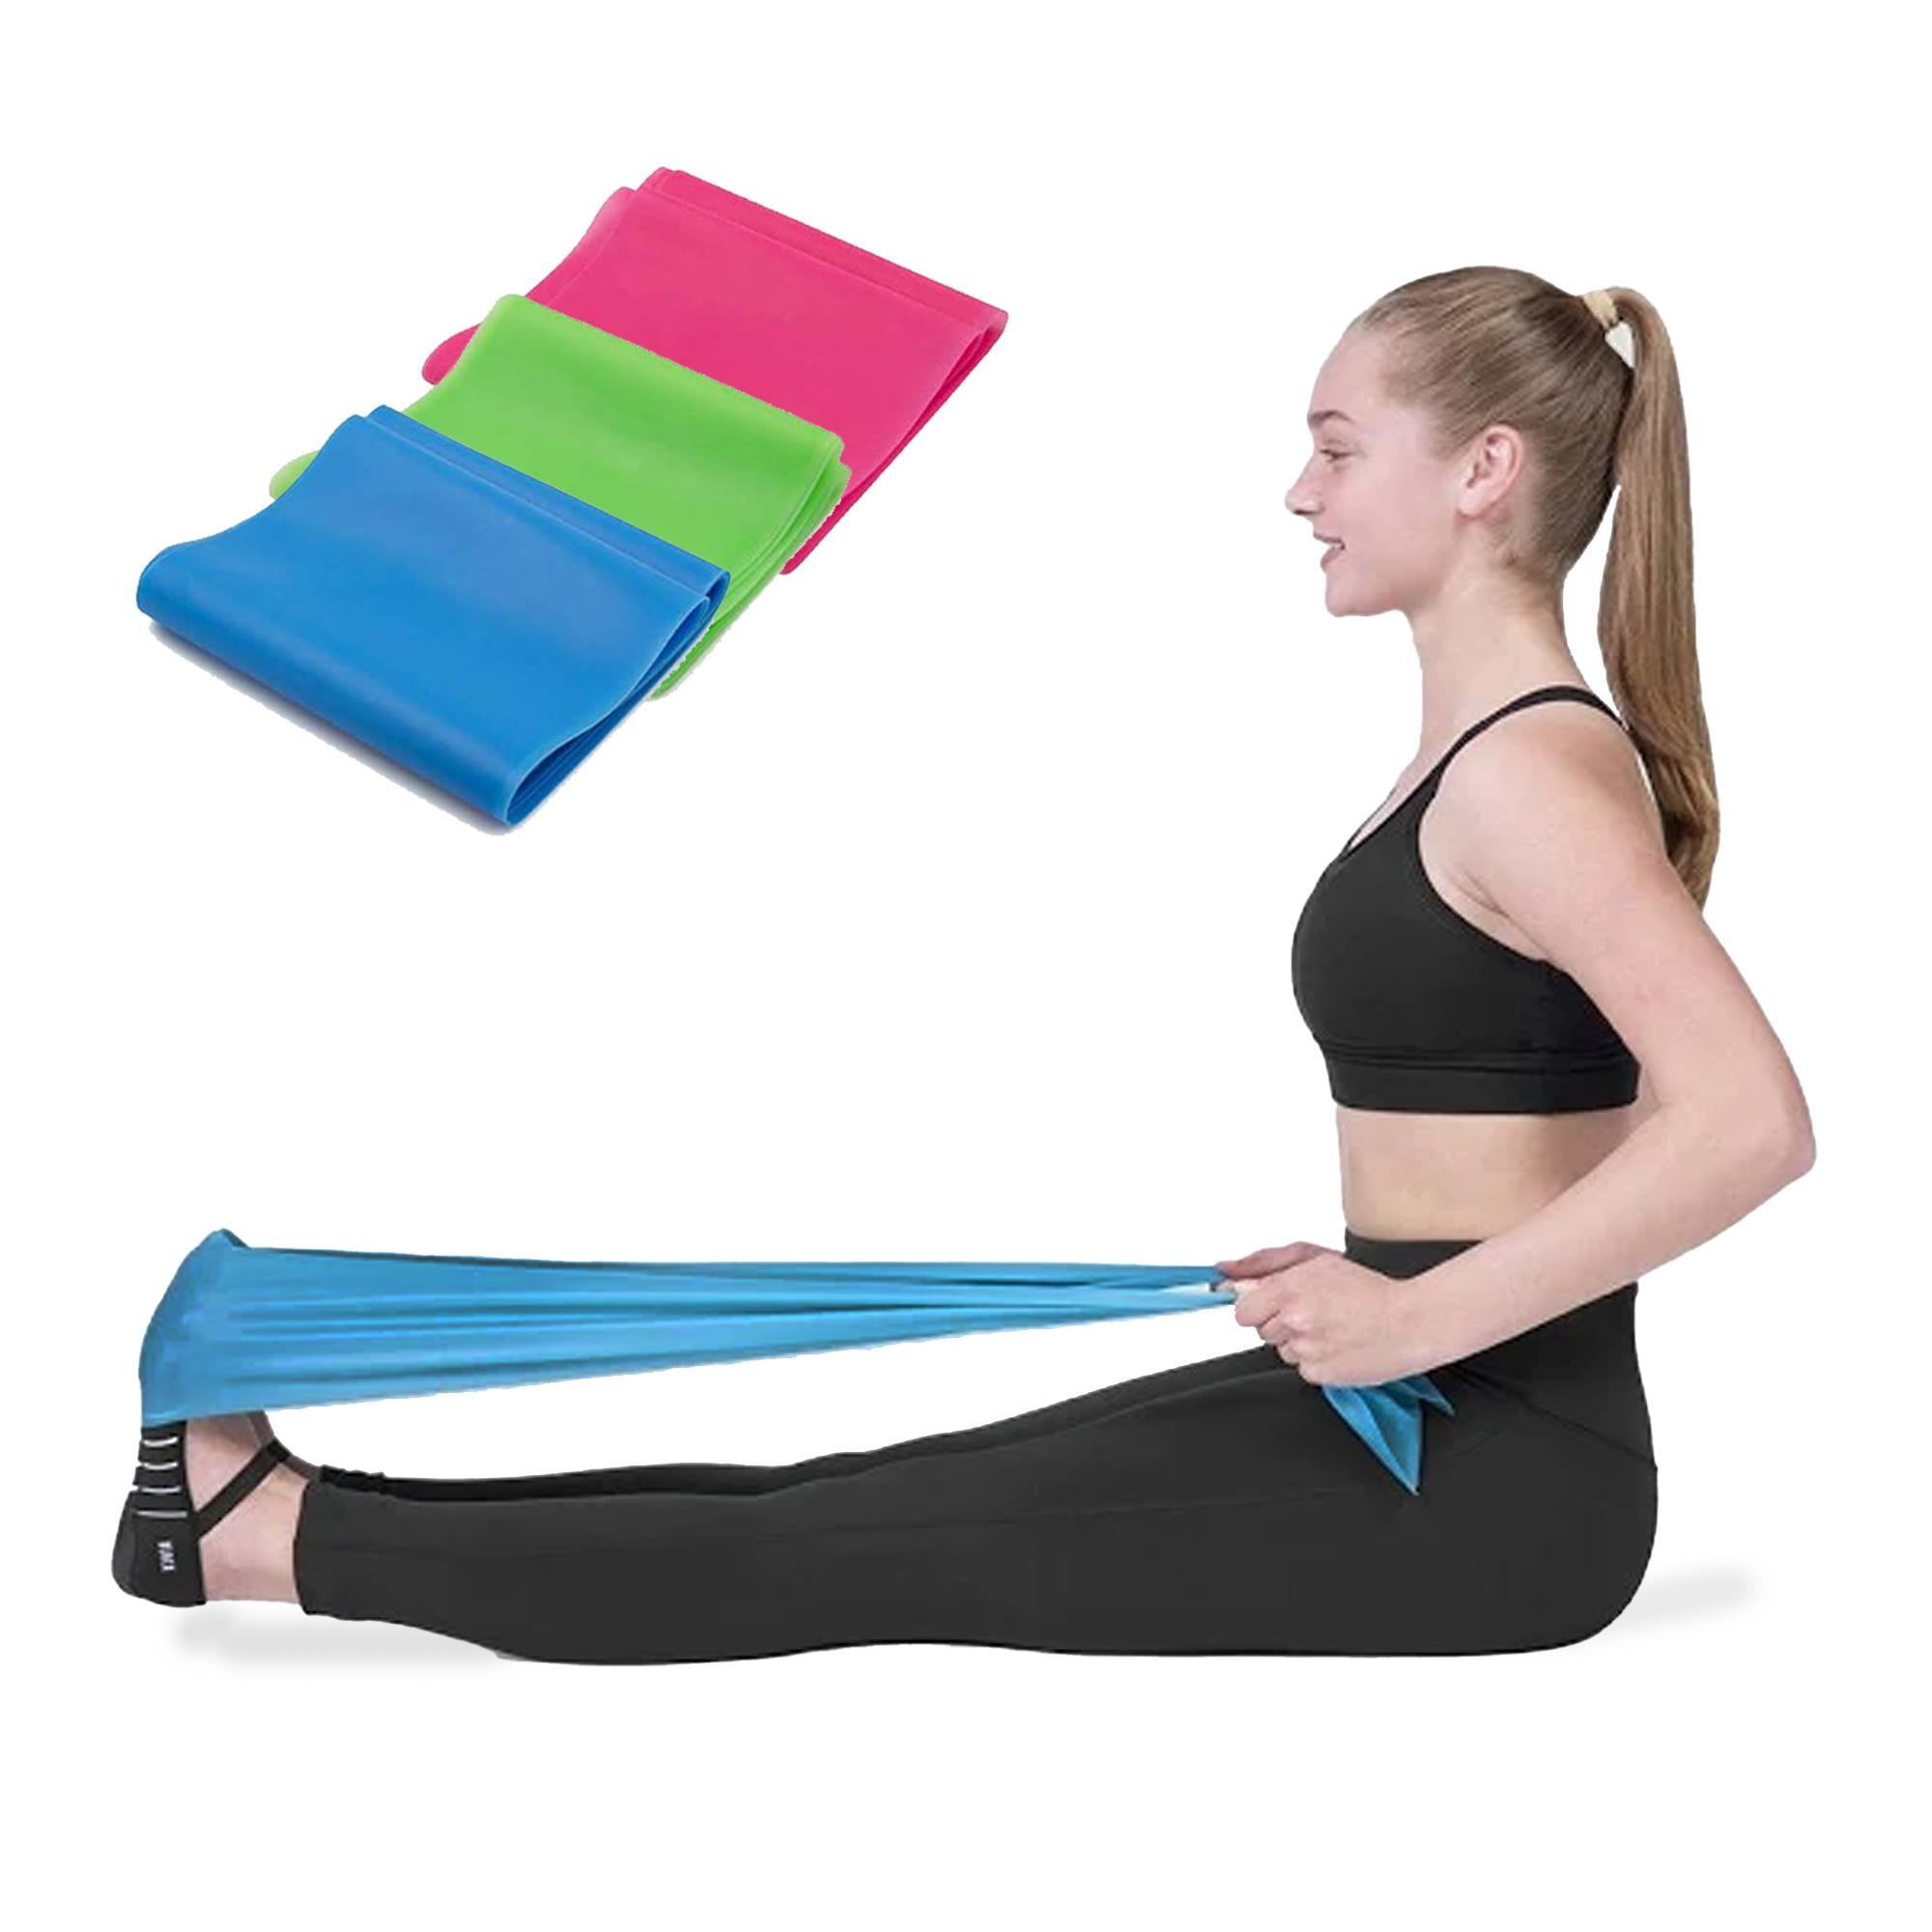 Pilates Yoga Resistance BAND Strenght Training Lt-Med Exercise Fitness Toning Y 